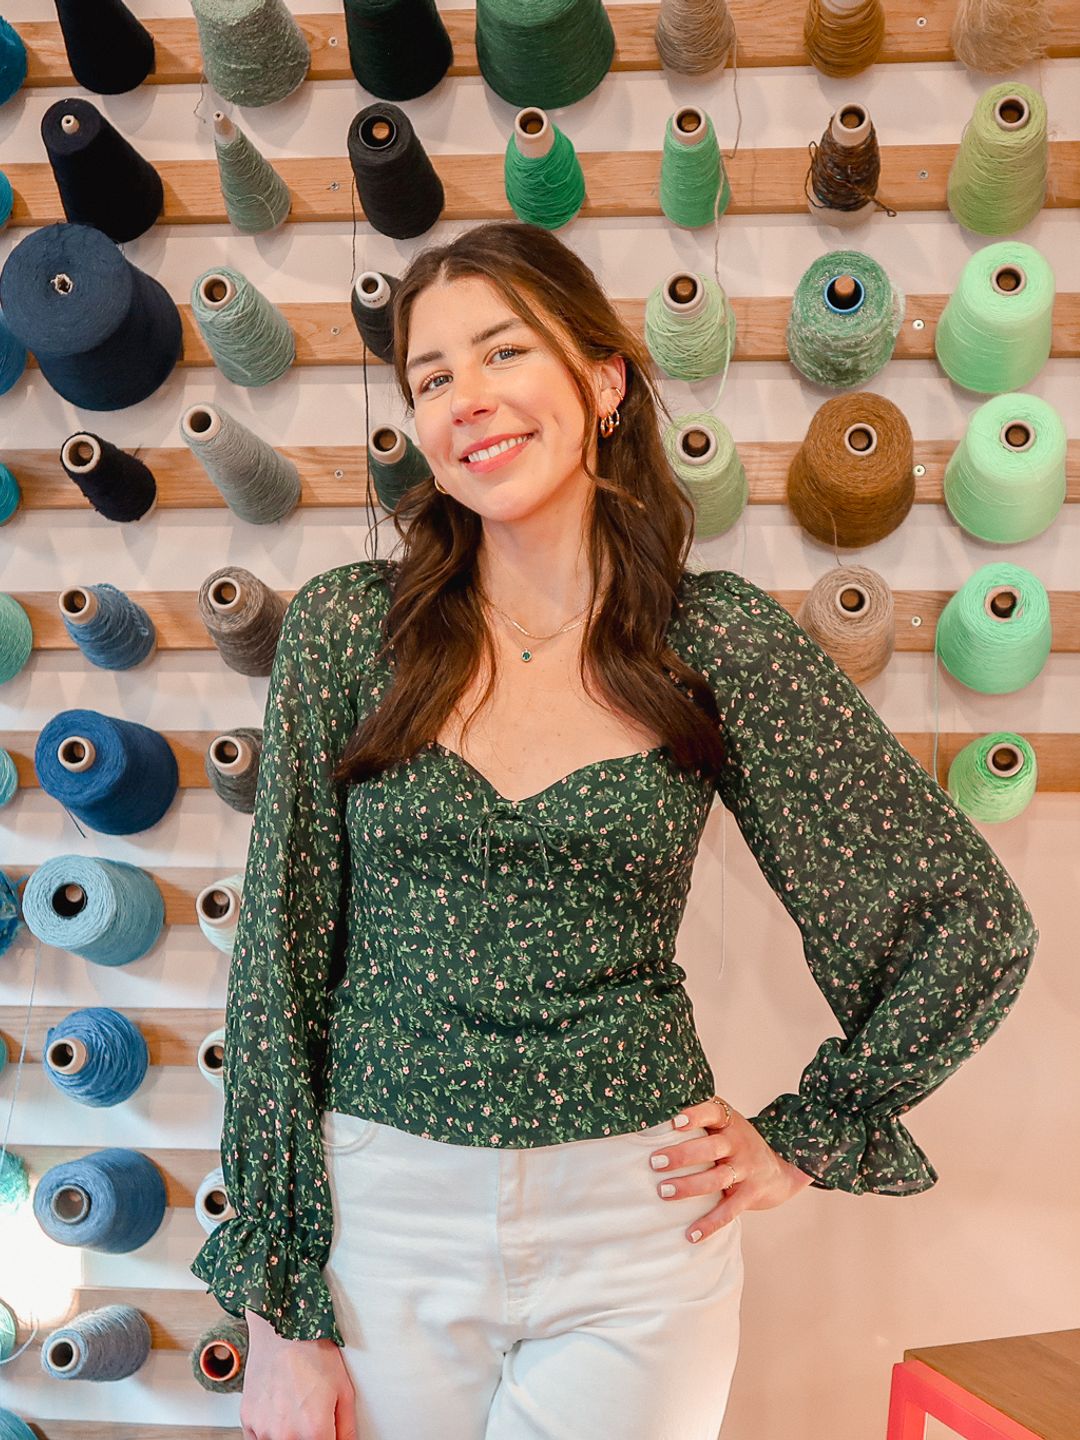 Layla Sargent, founder of The Seam posing in front of yarns of cotton